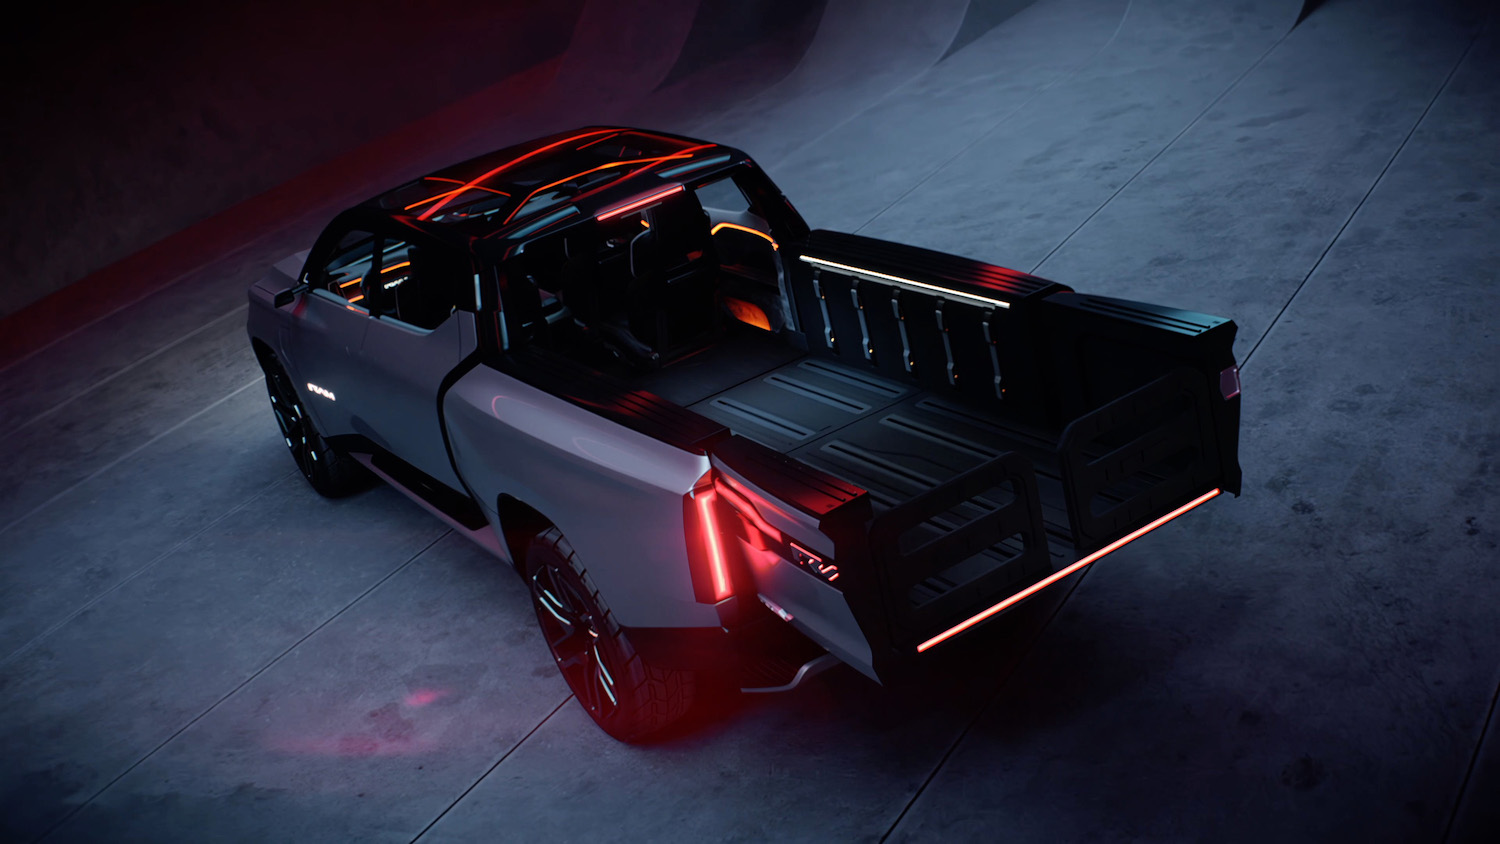 The bed and rear jump seats of the Ram Revolution electric pickup truck concept.